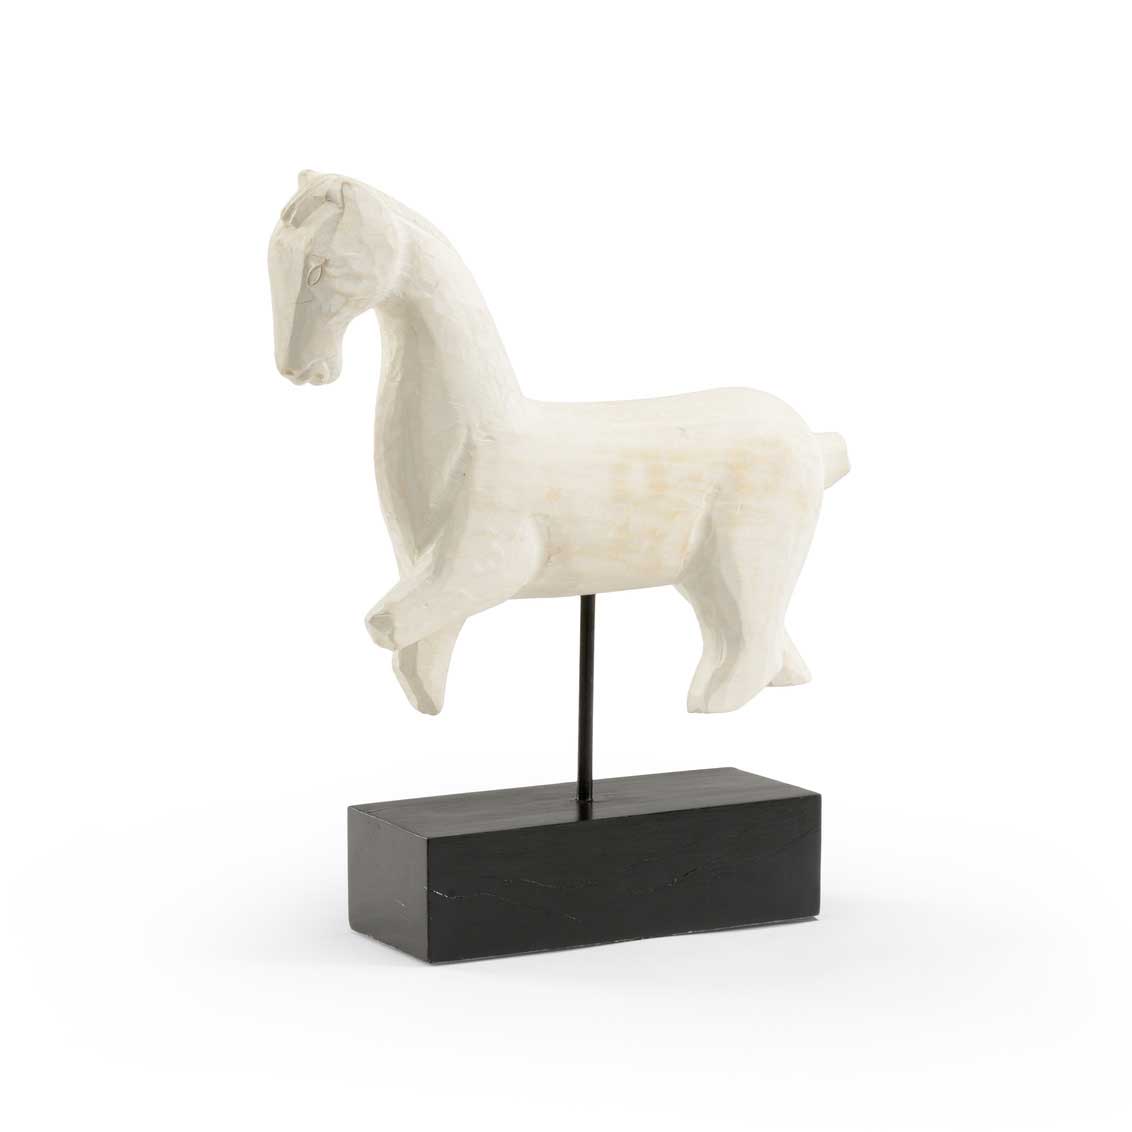 Running Horse Sculpture Decorative Accessory White Wood Wildwood